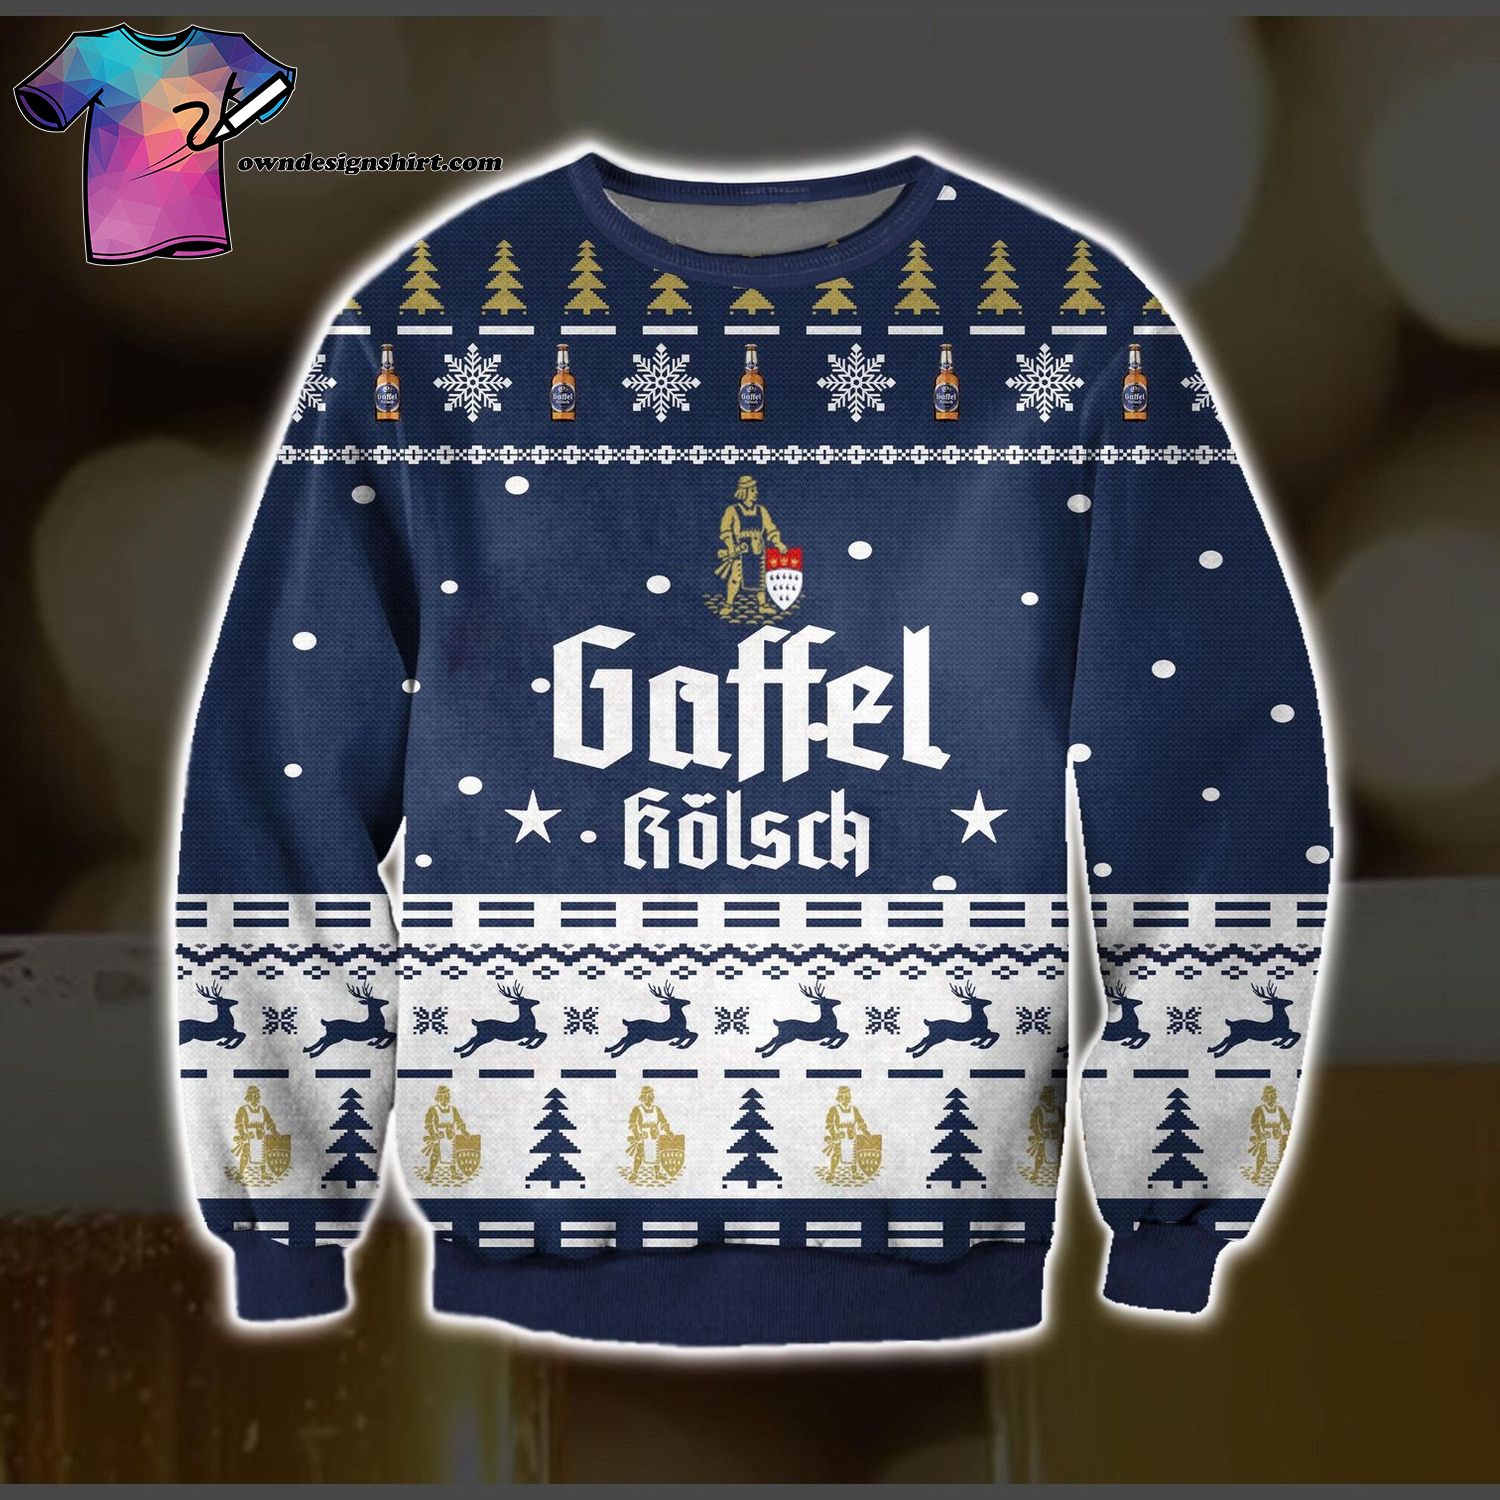 Gaffel Kolsch Beer All Over Printed Ugly Christmas Sweater